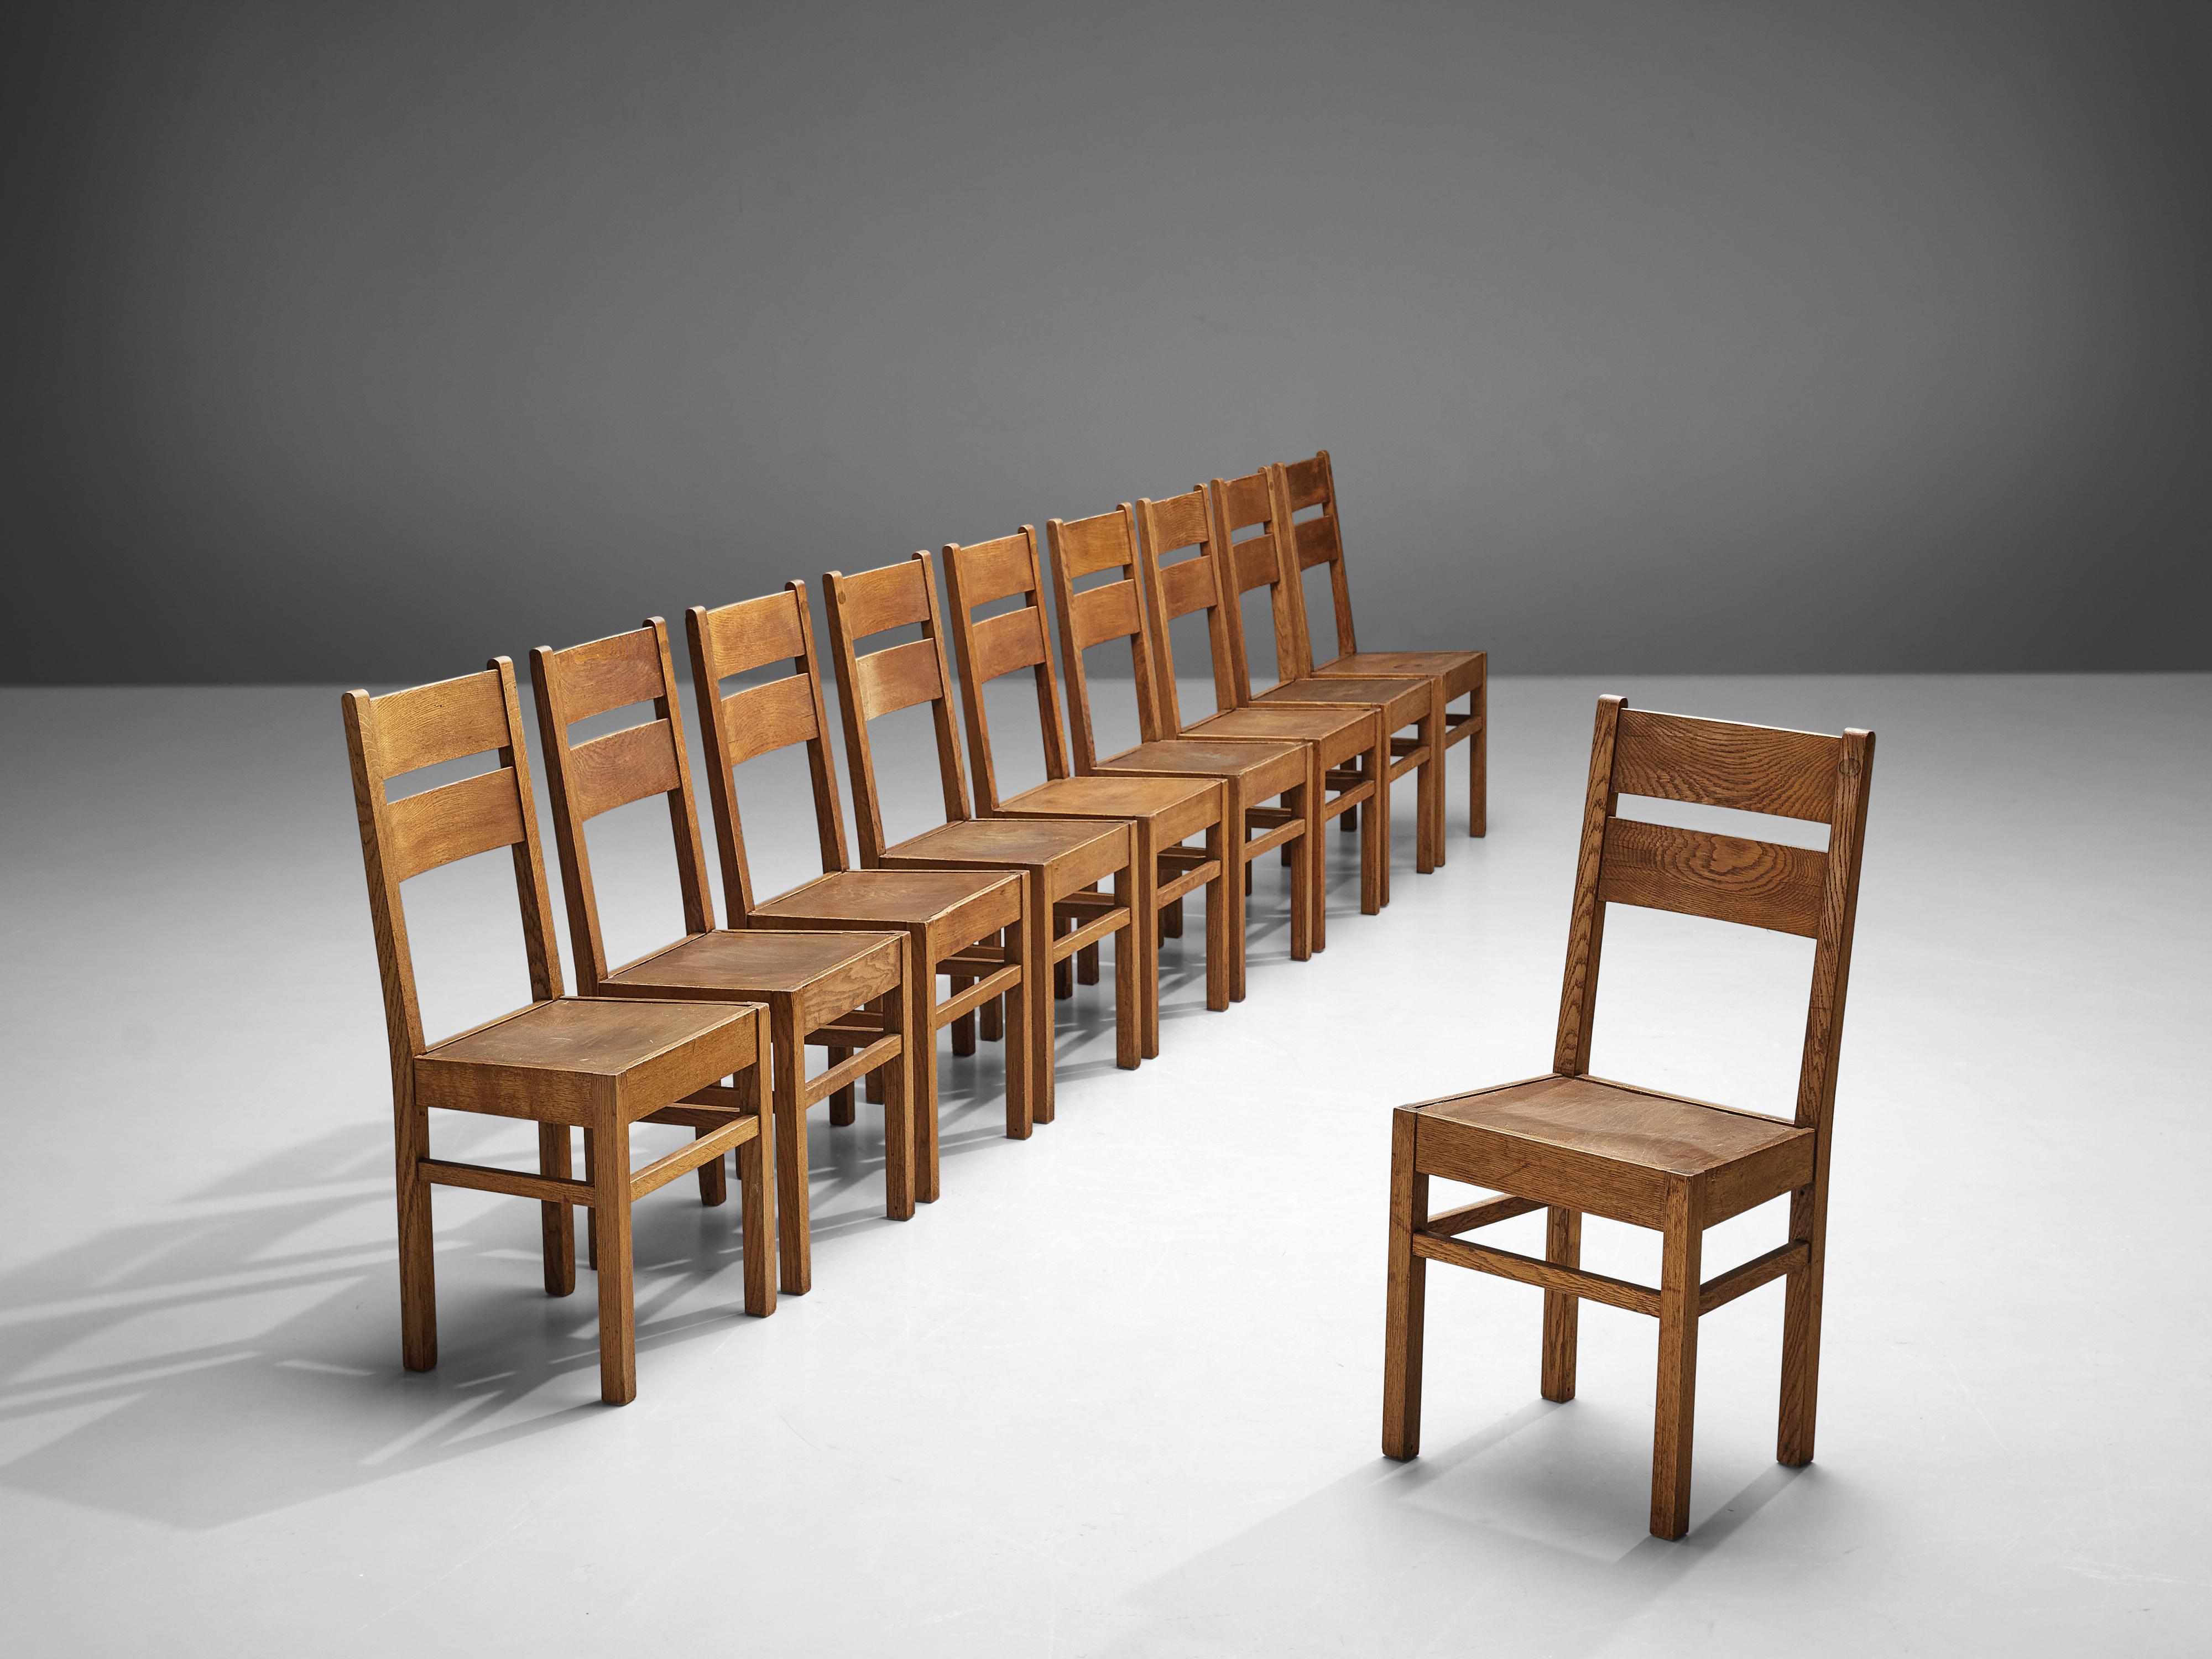 Dining chairs, oak, The Netherlands, 1940s

These subtle and modest chairs from Dutch origin are executed in oak that has a natural expression due to the visible wooden grains and warm tone. Hence, this gives these chairs an authentic and natural